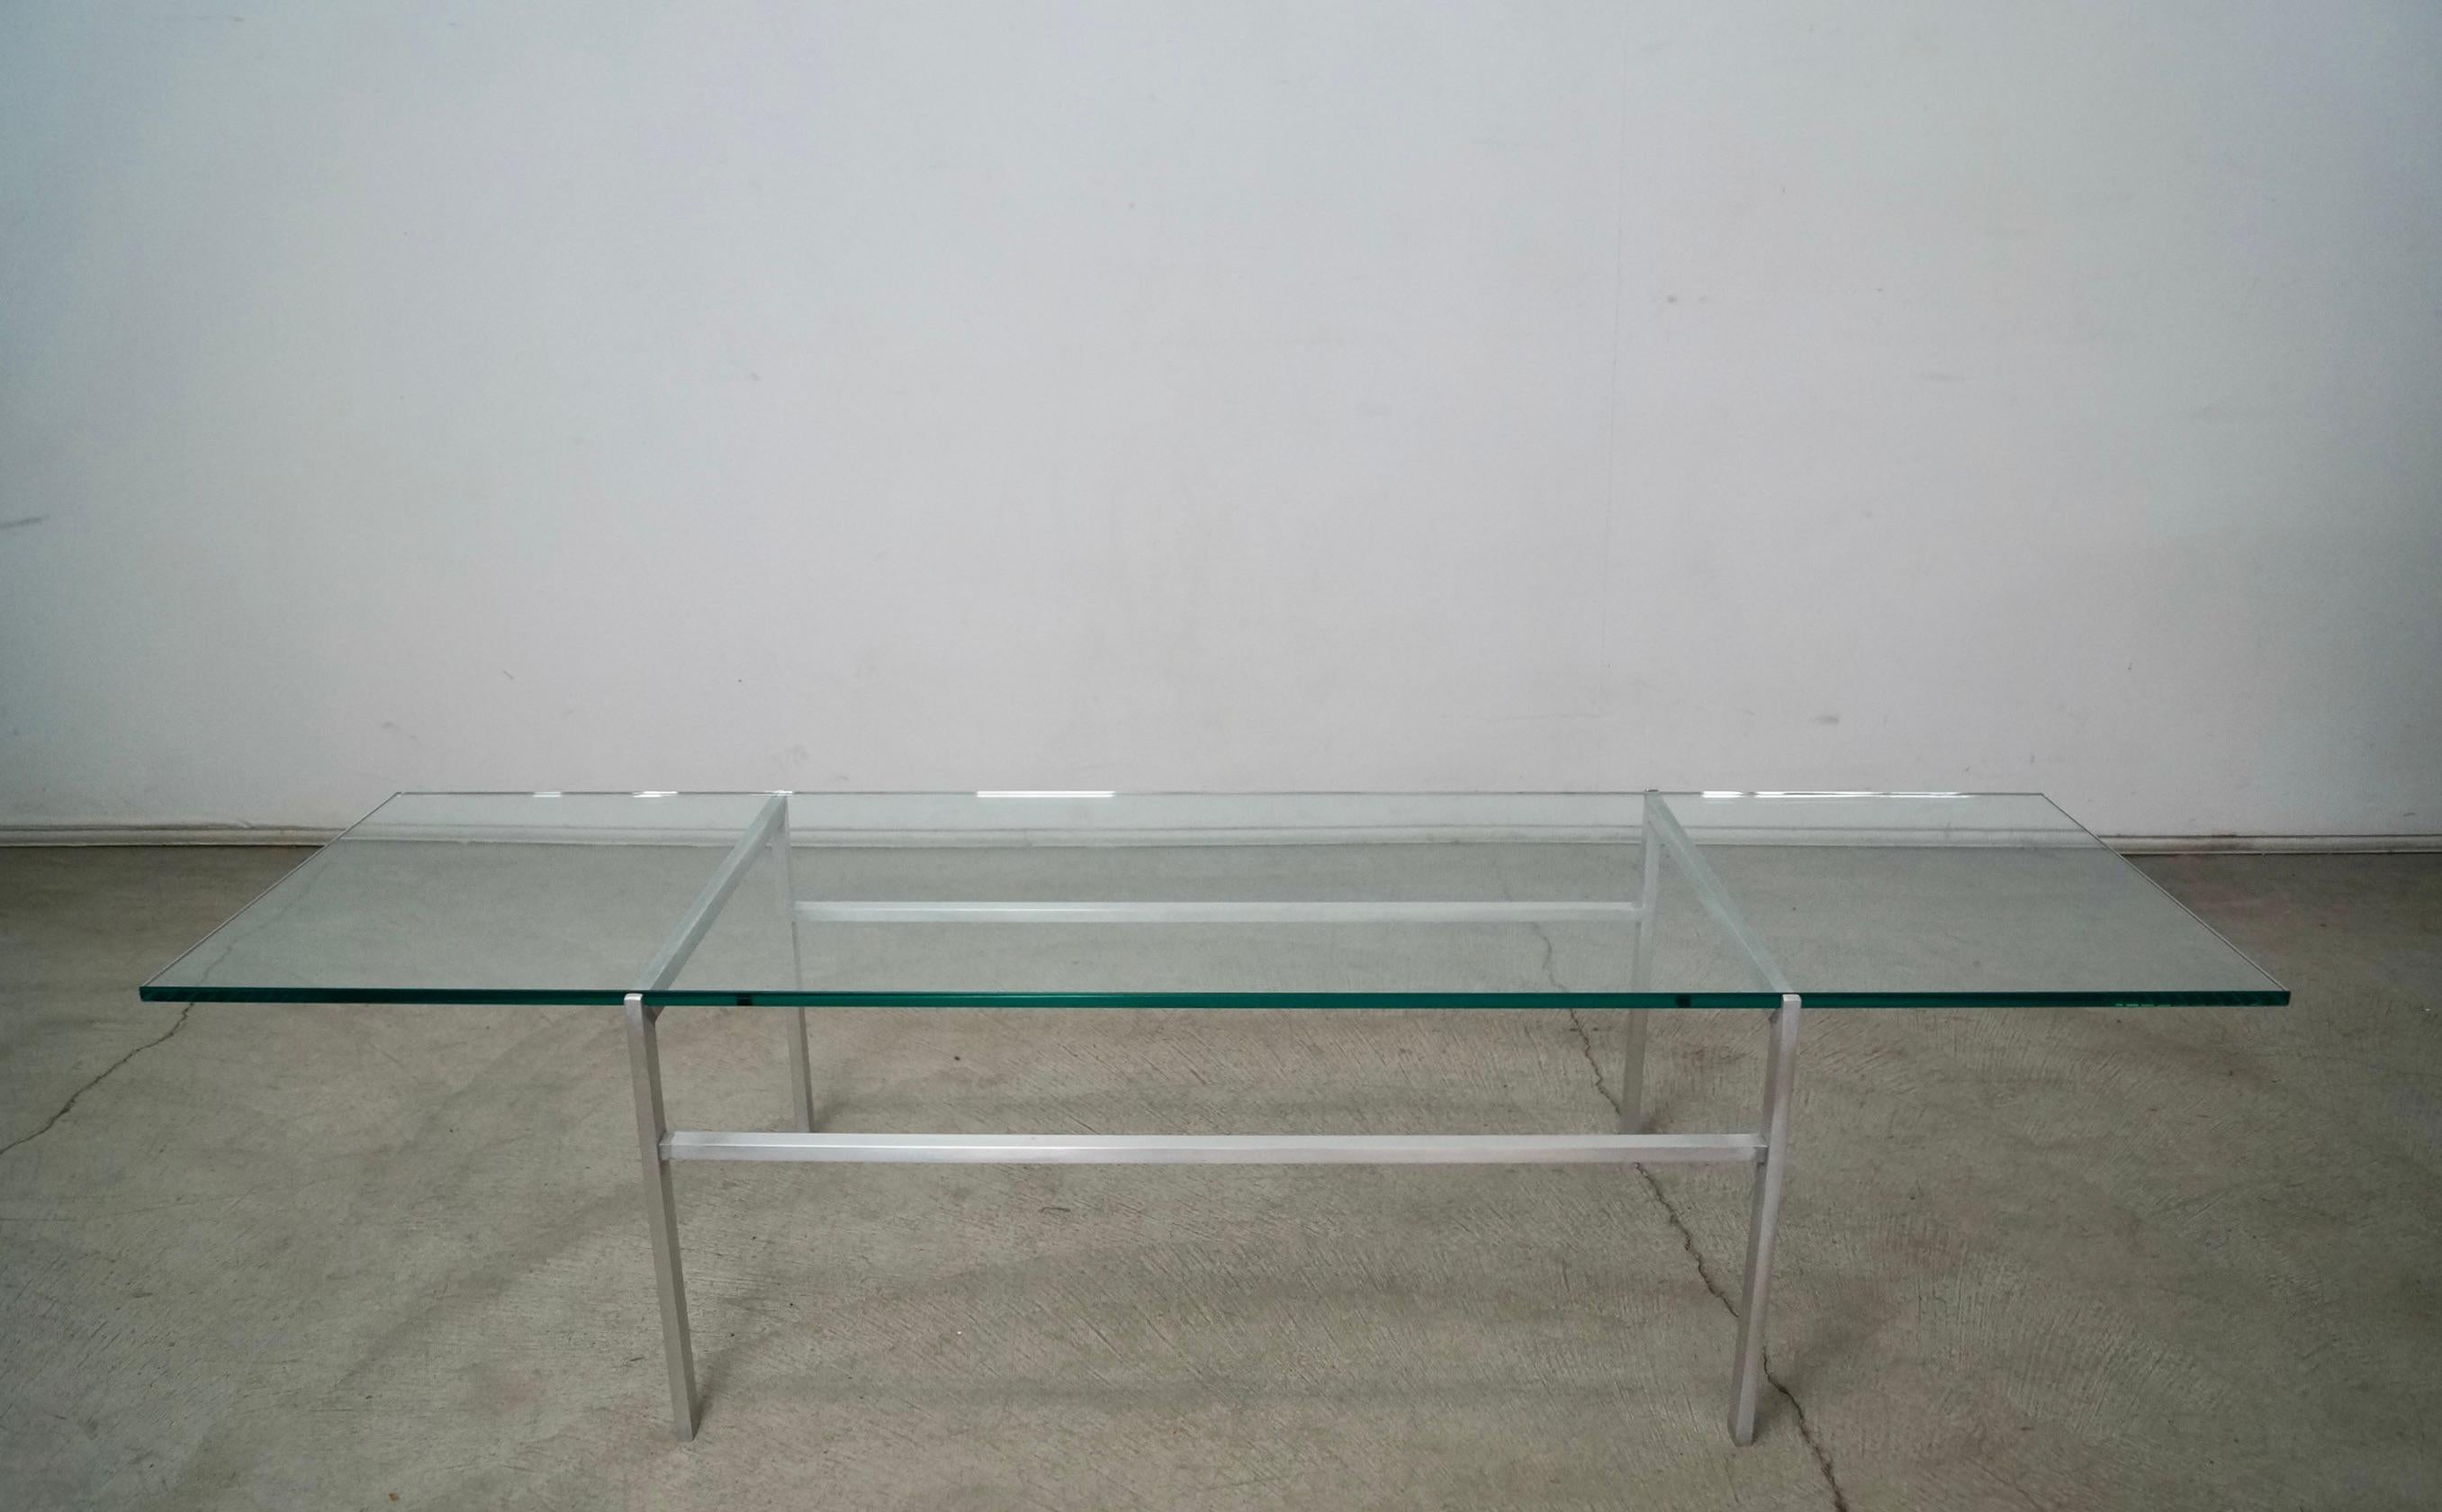 Vintage Midcentury Modern coffee table for sale. Manufactured in the 1960's, and has an aluminum base with a floating thick glass top. It has a very beautiful and sleek aesthetic, and is in the manner of Gerald McCabe and Herman Miller designs. The